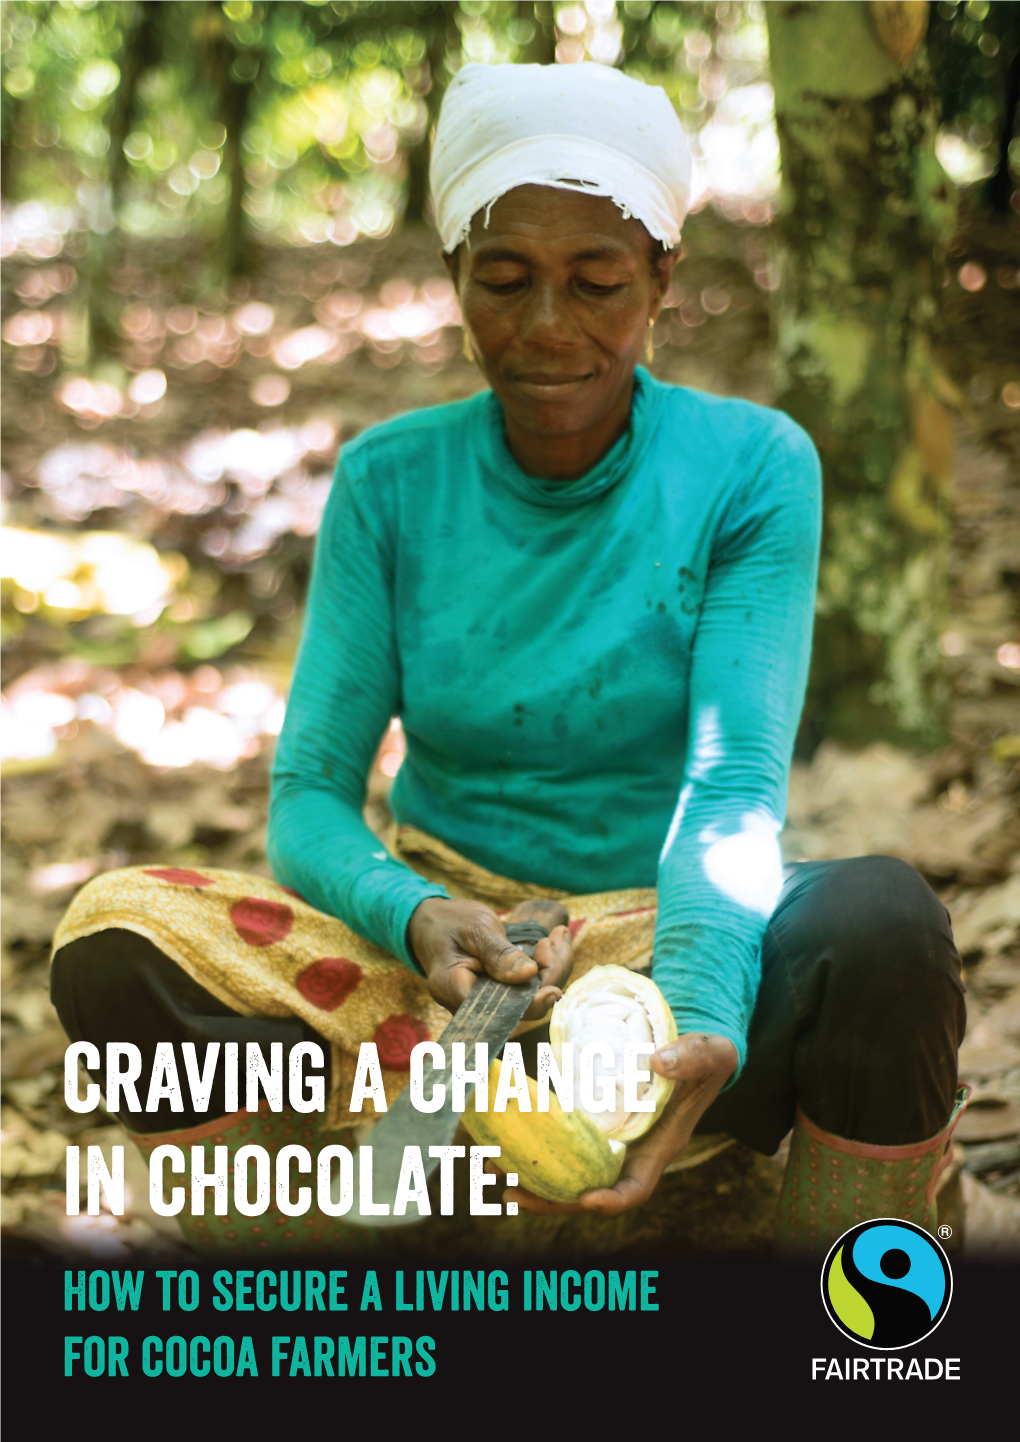 Craving a Change in Chocolate: How to Secure a Living Income for Cocoa Farmers INTRODUCTION Craving a Change in Chocolate